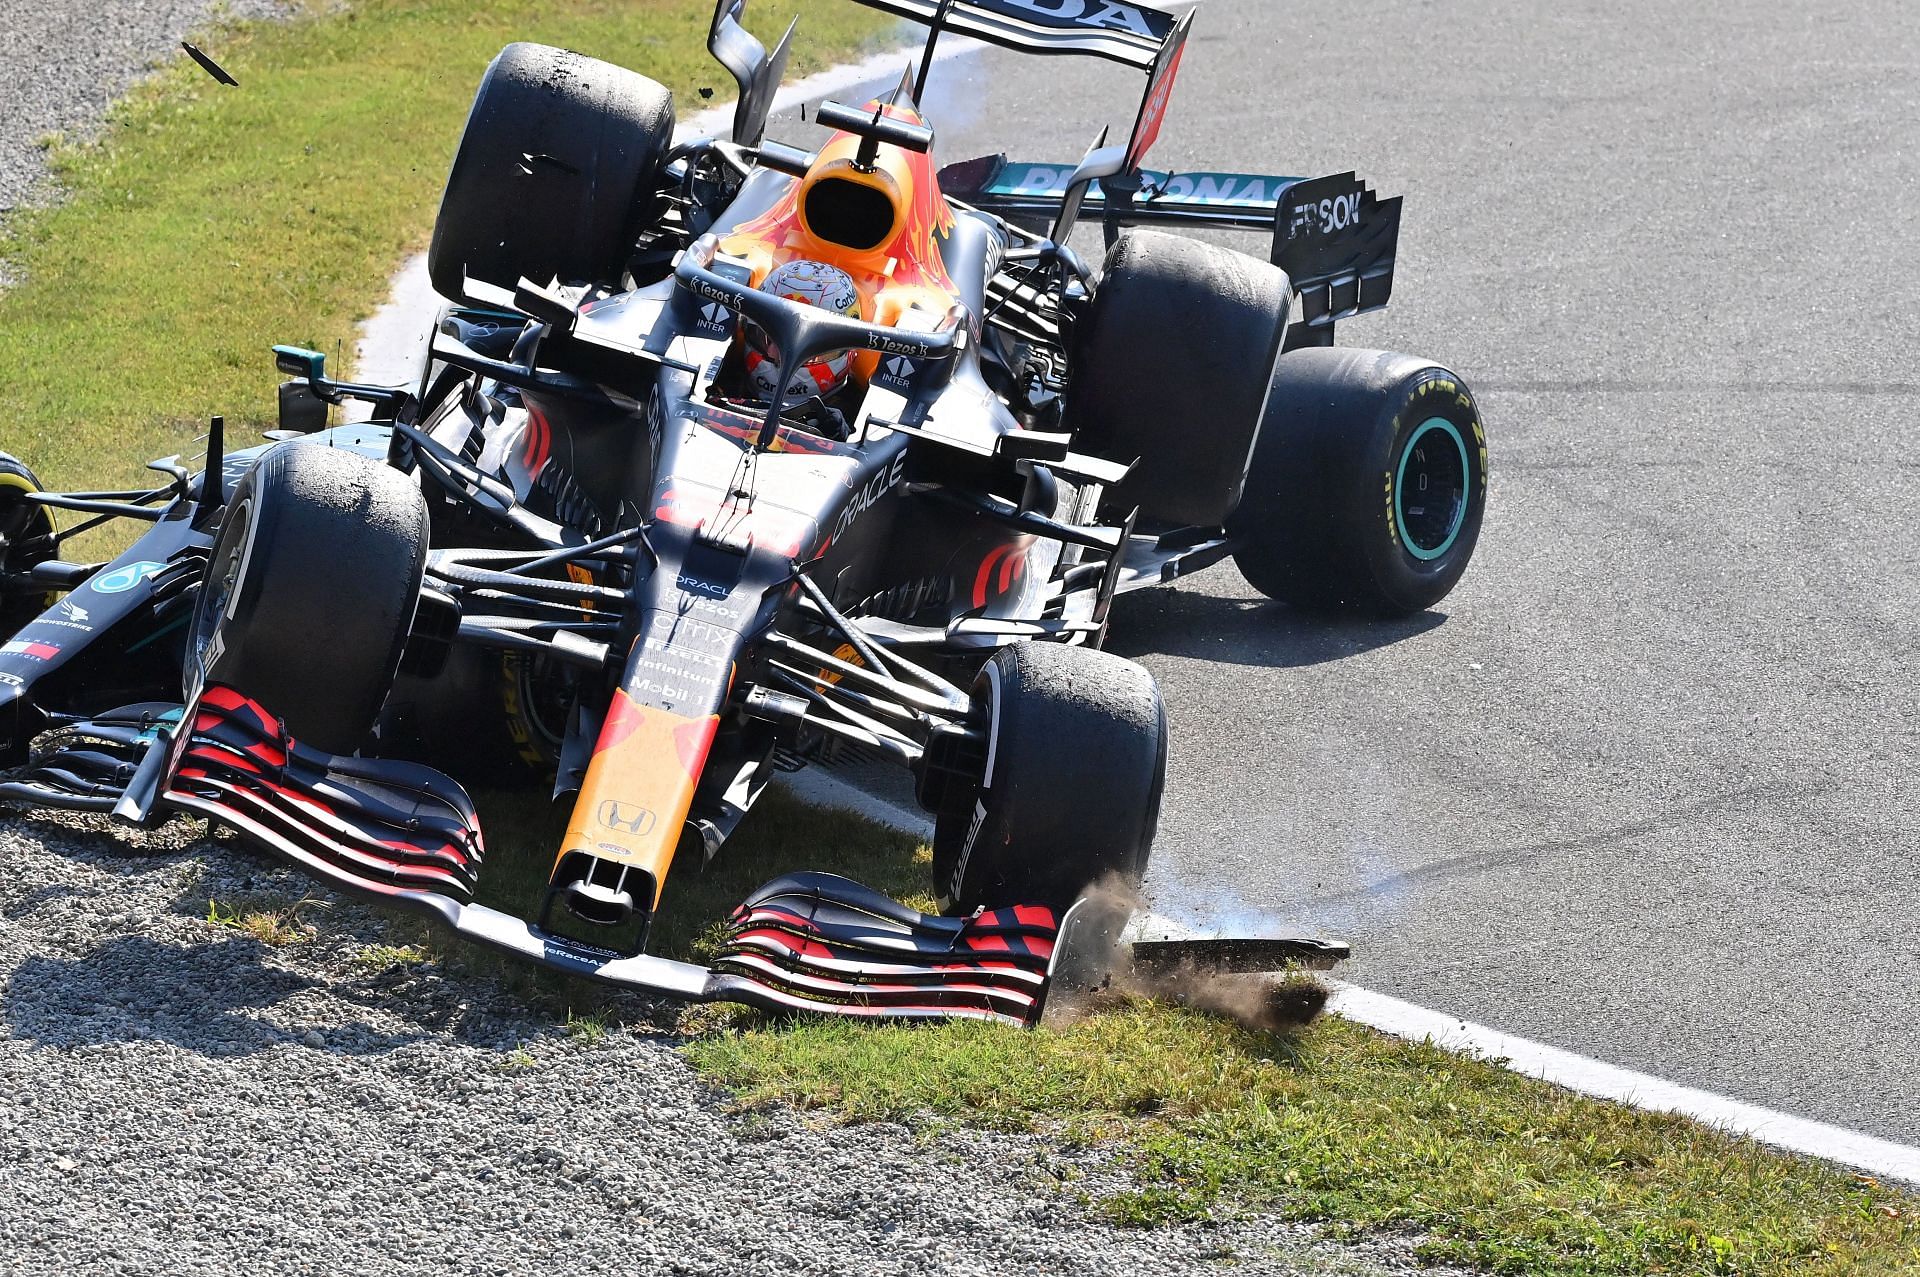 Verstappen lands atop Hamilton after colliding at turn 1 at Monza